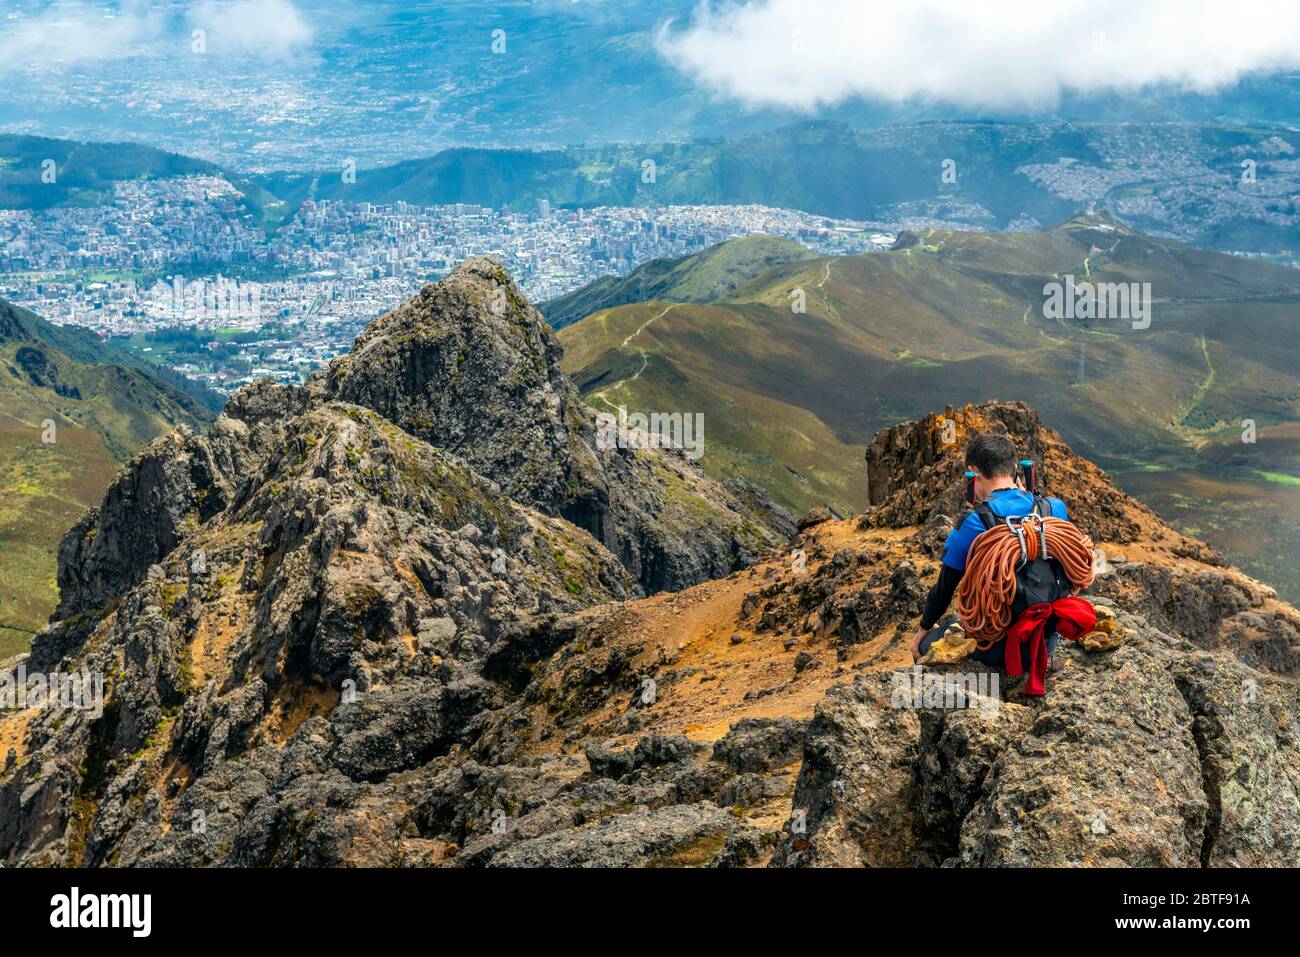 Mountain climber with ropes and walking sticks enjoying the view, making a phone call after reaching the Rucu Pichincha Volcano Peak, Quito, Ecuador. Stock Photo